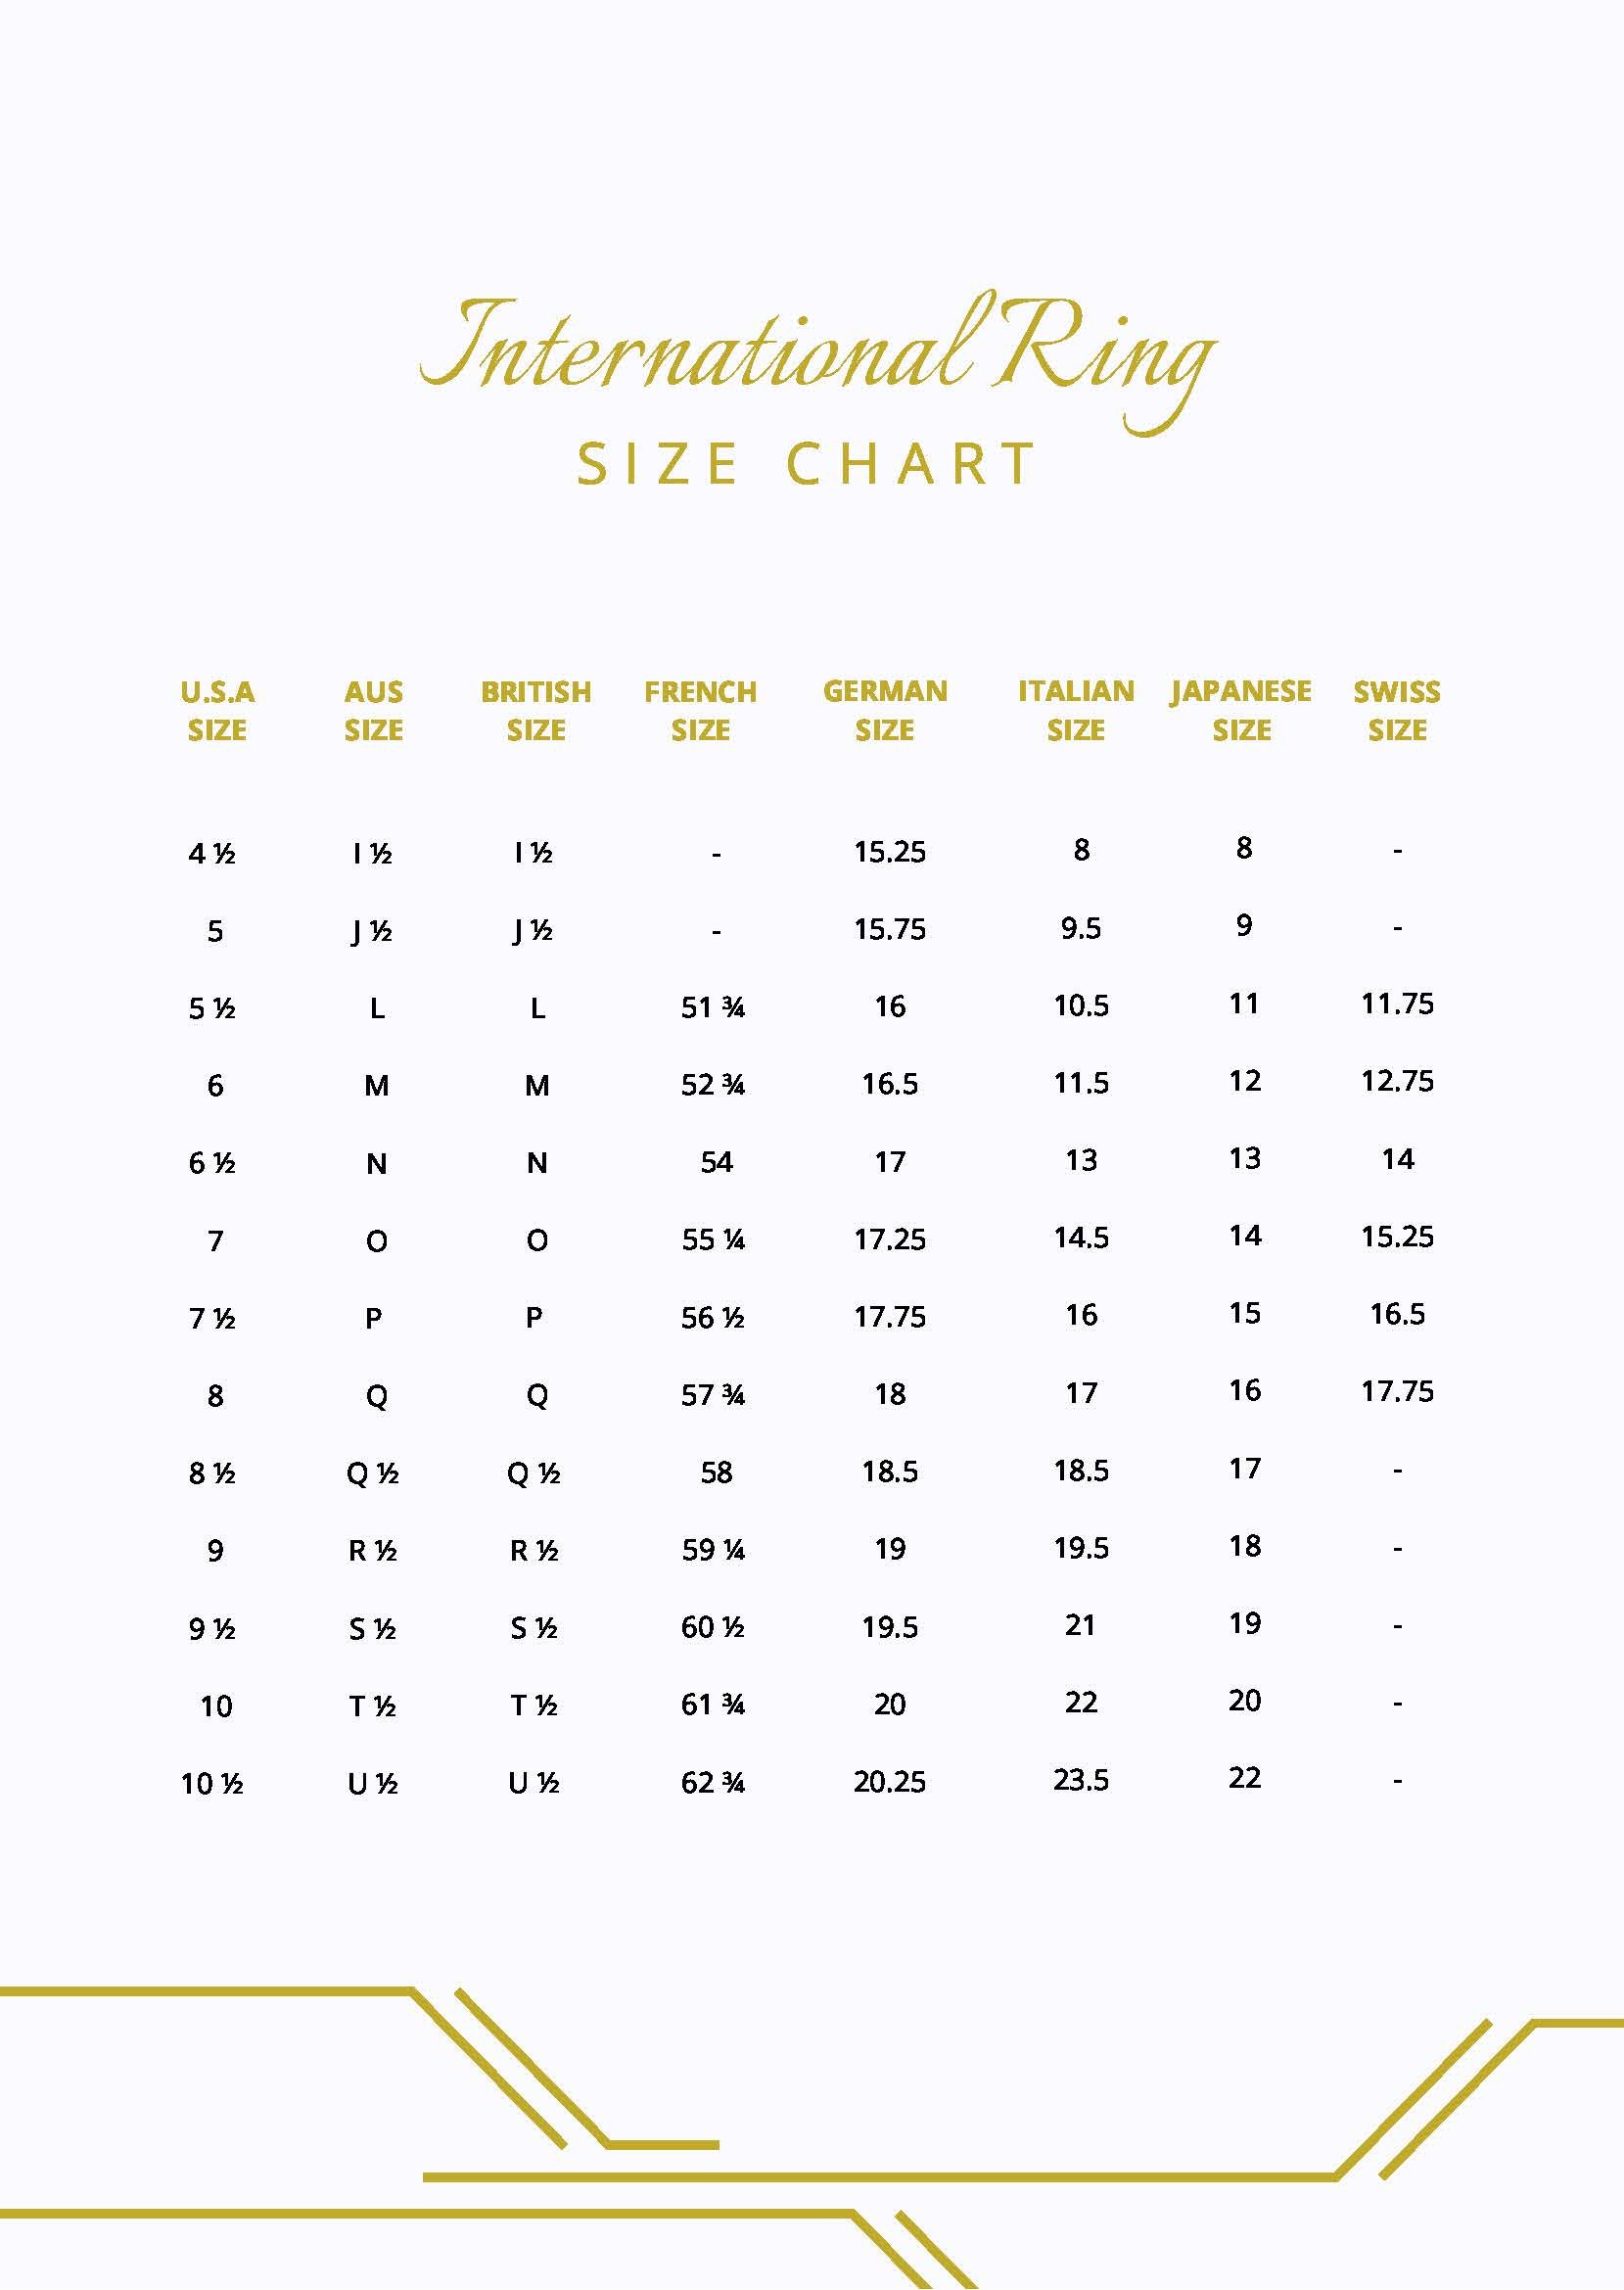 International Ring Size Chart in PDF